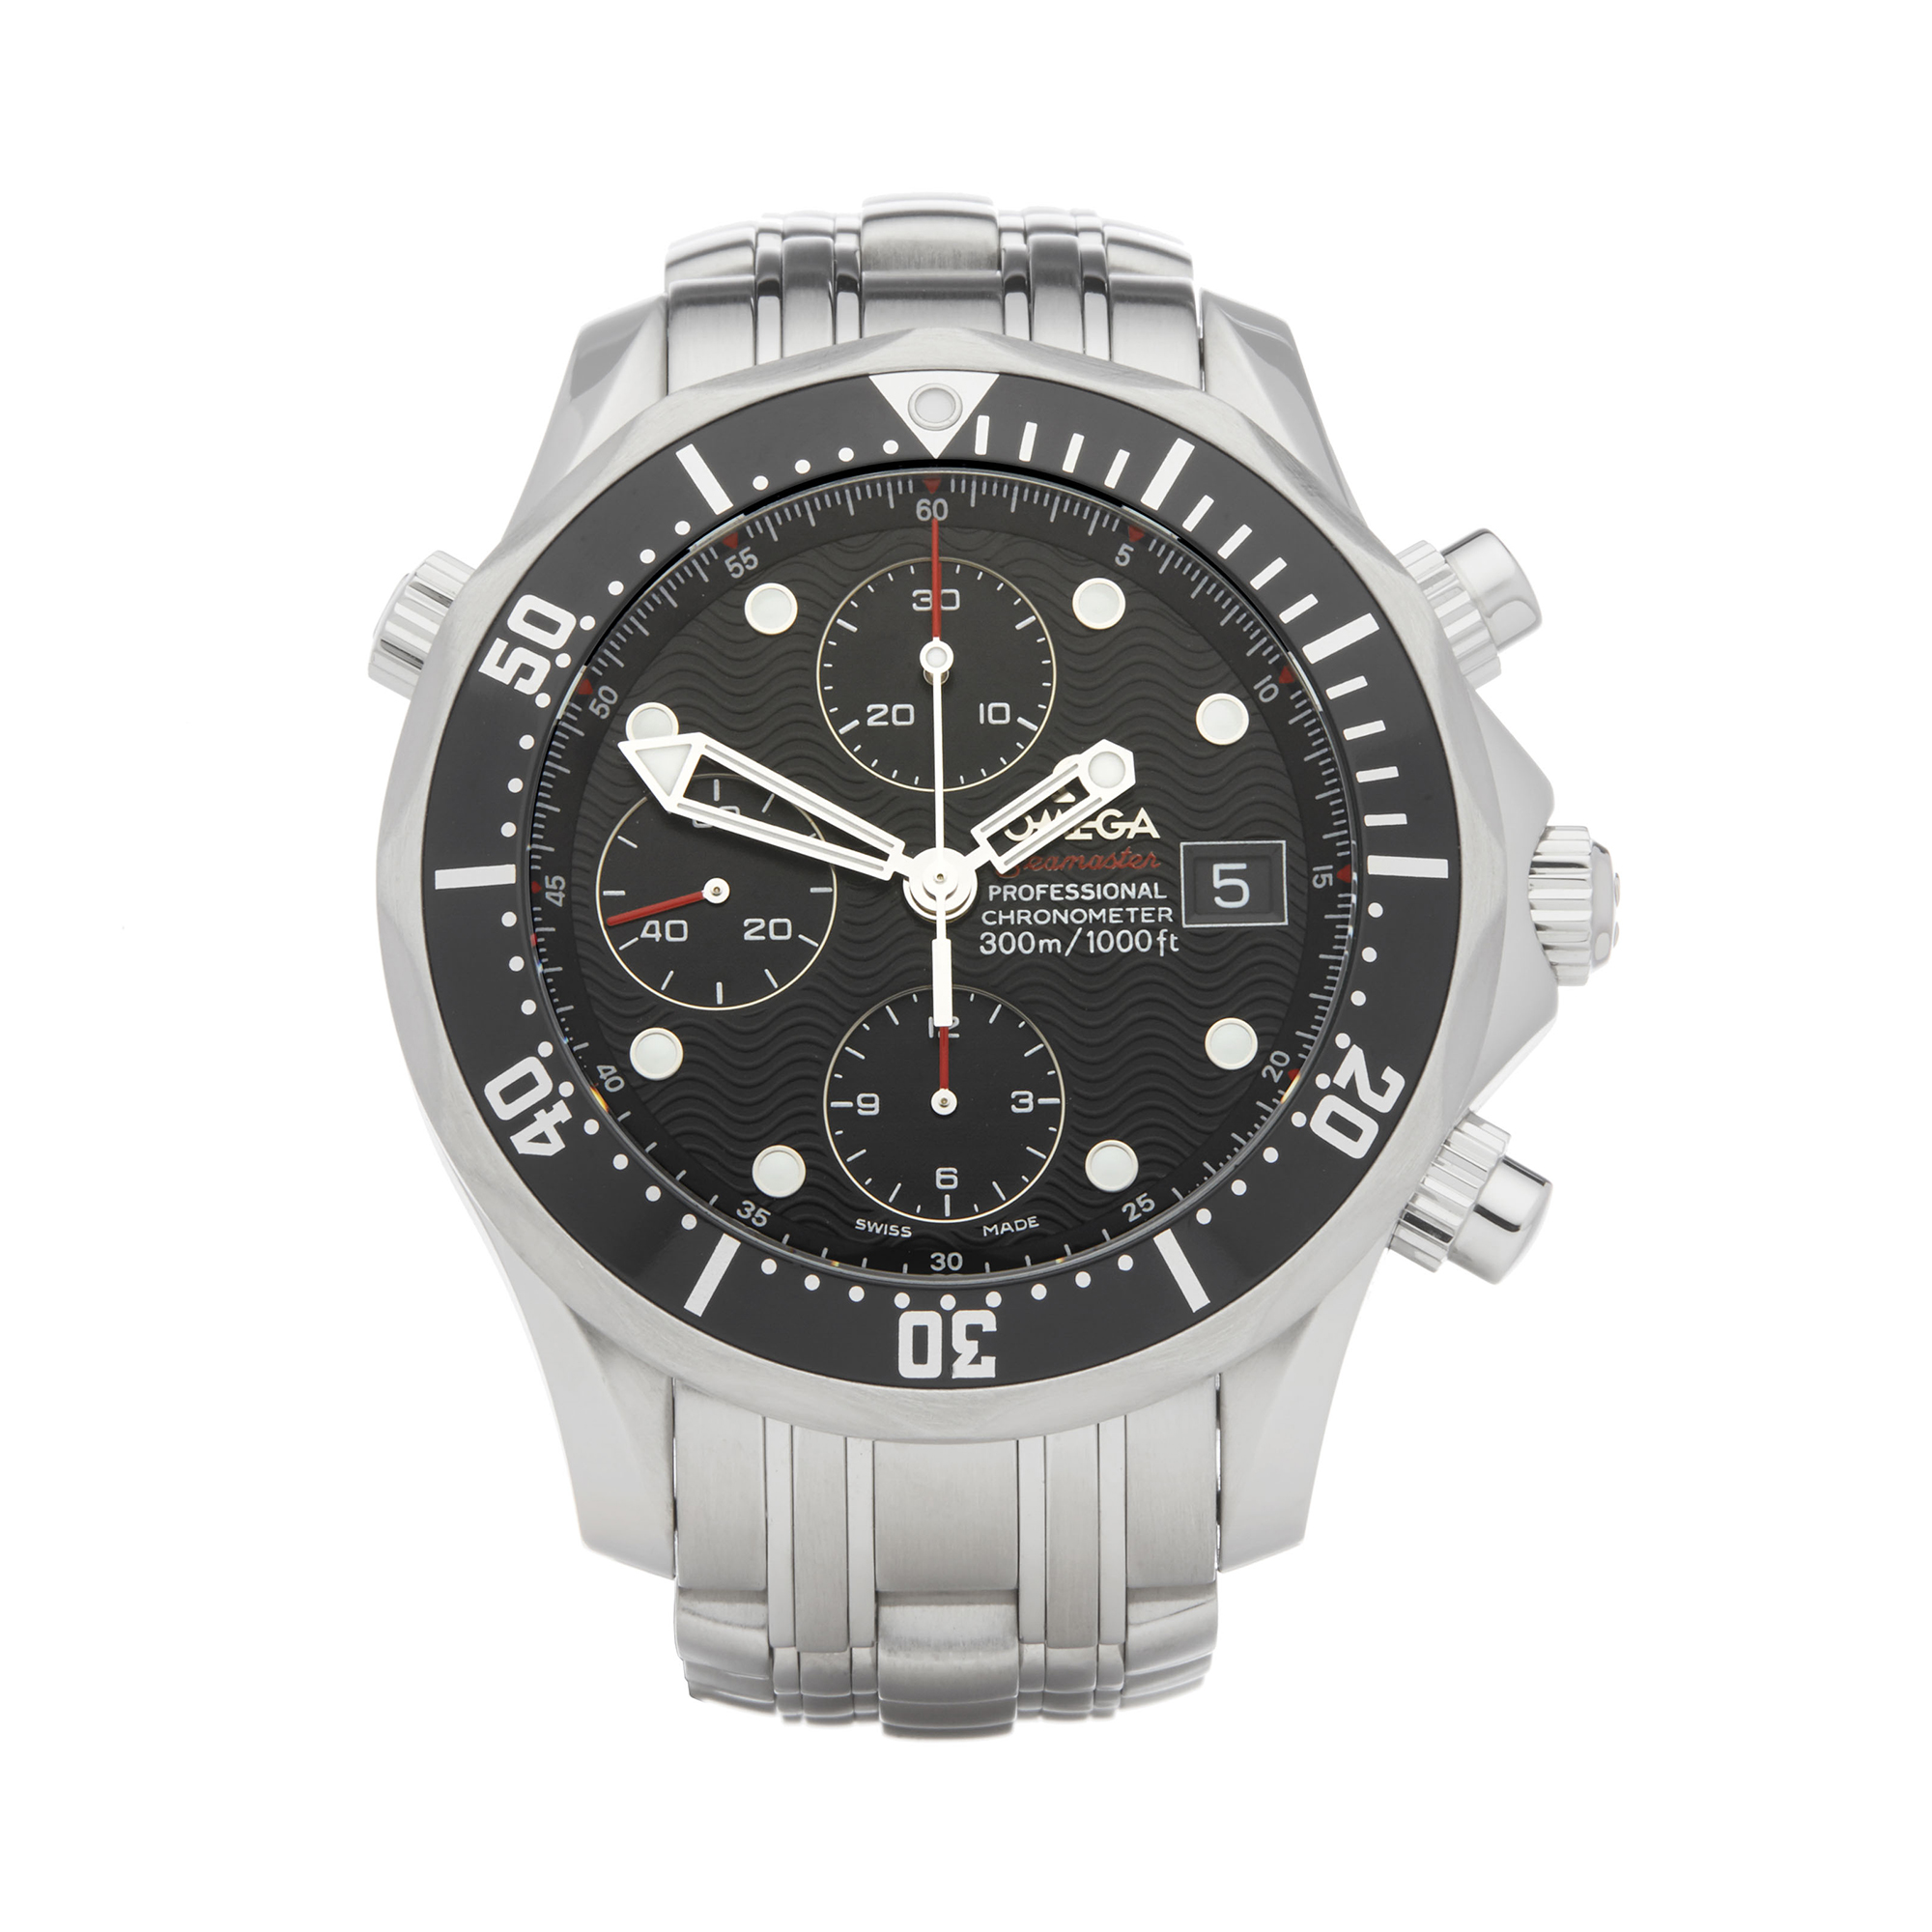 Omega Seamaster 213.30.42.40.01.001 Men Stainless Steel Chronograph Watch - Image 9 of 9